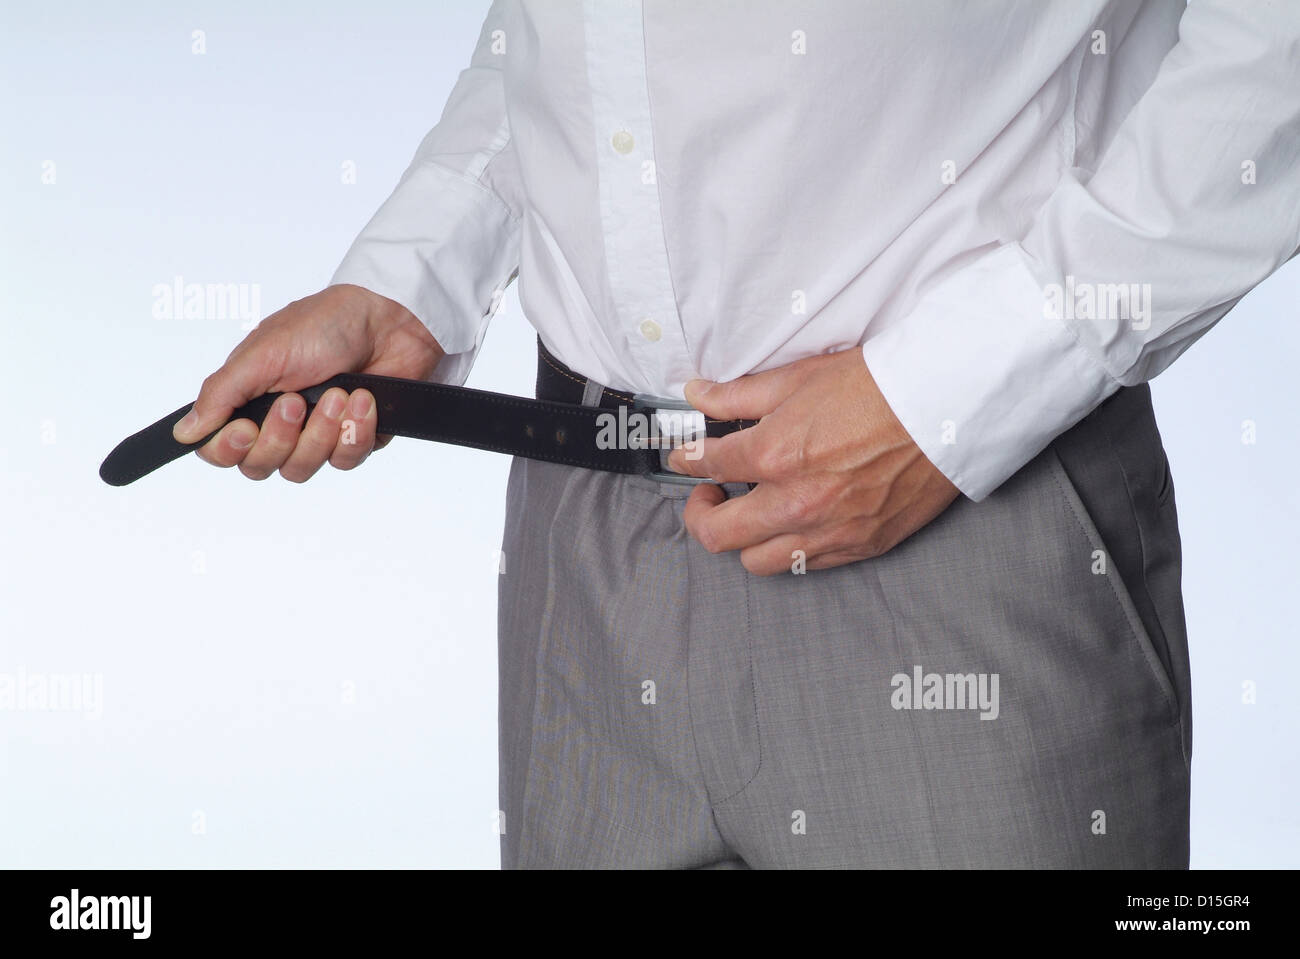 Hamburg, Germany, a man strapped on his belt tighter Stock Photo